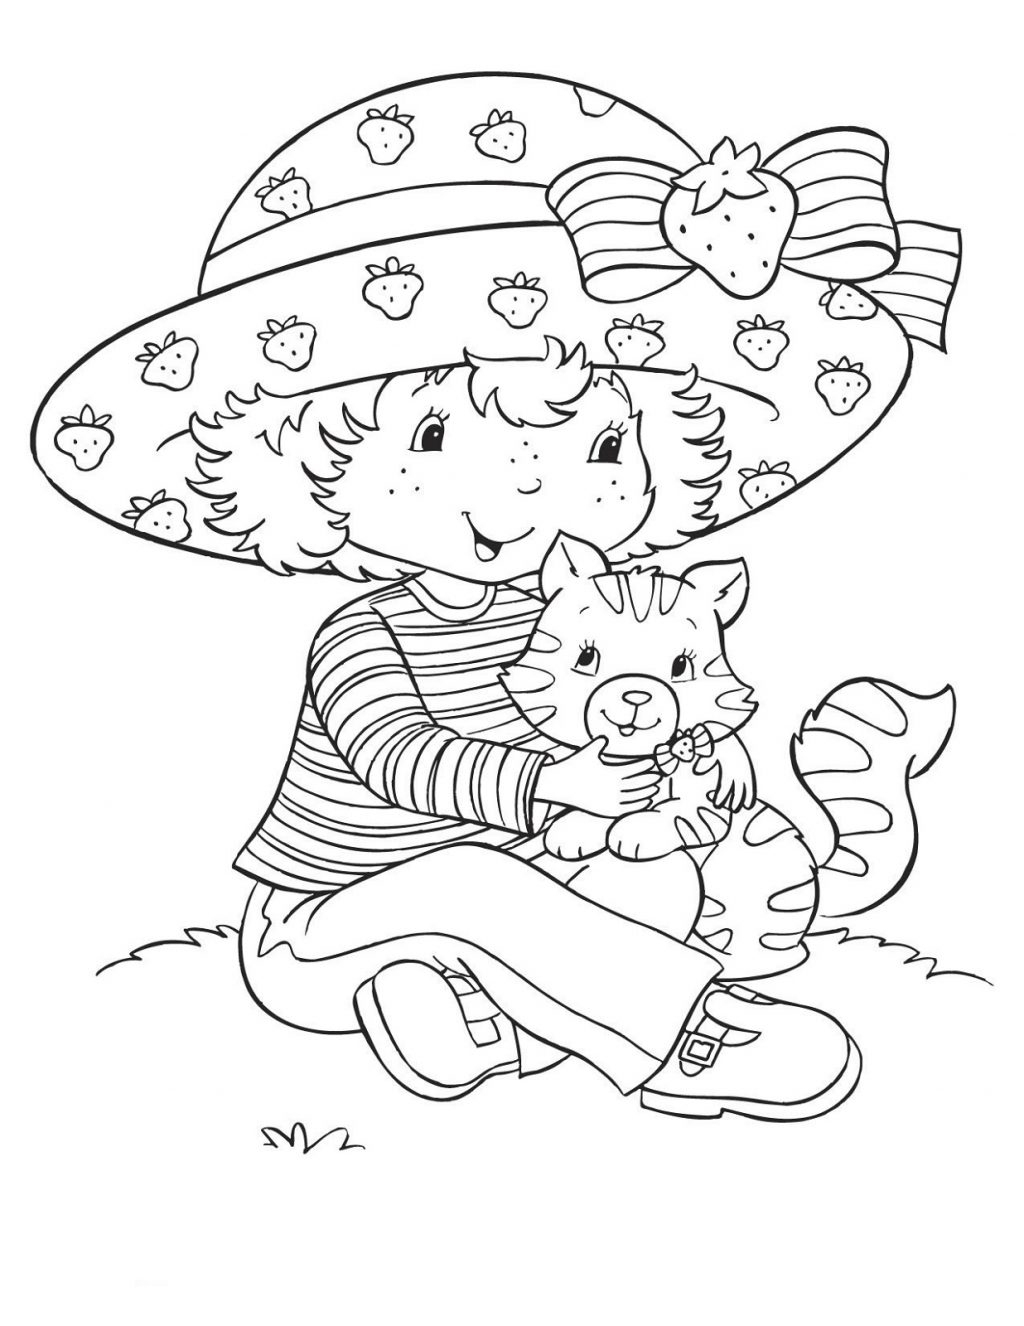 Coloring Pages ~ Coloring Pageserry Shortcake For Kids Learning - Strawberry Shortcake Coloring Pages Free Printable